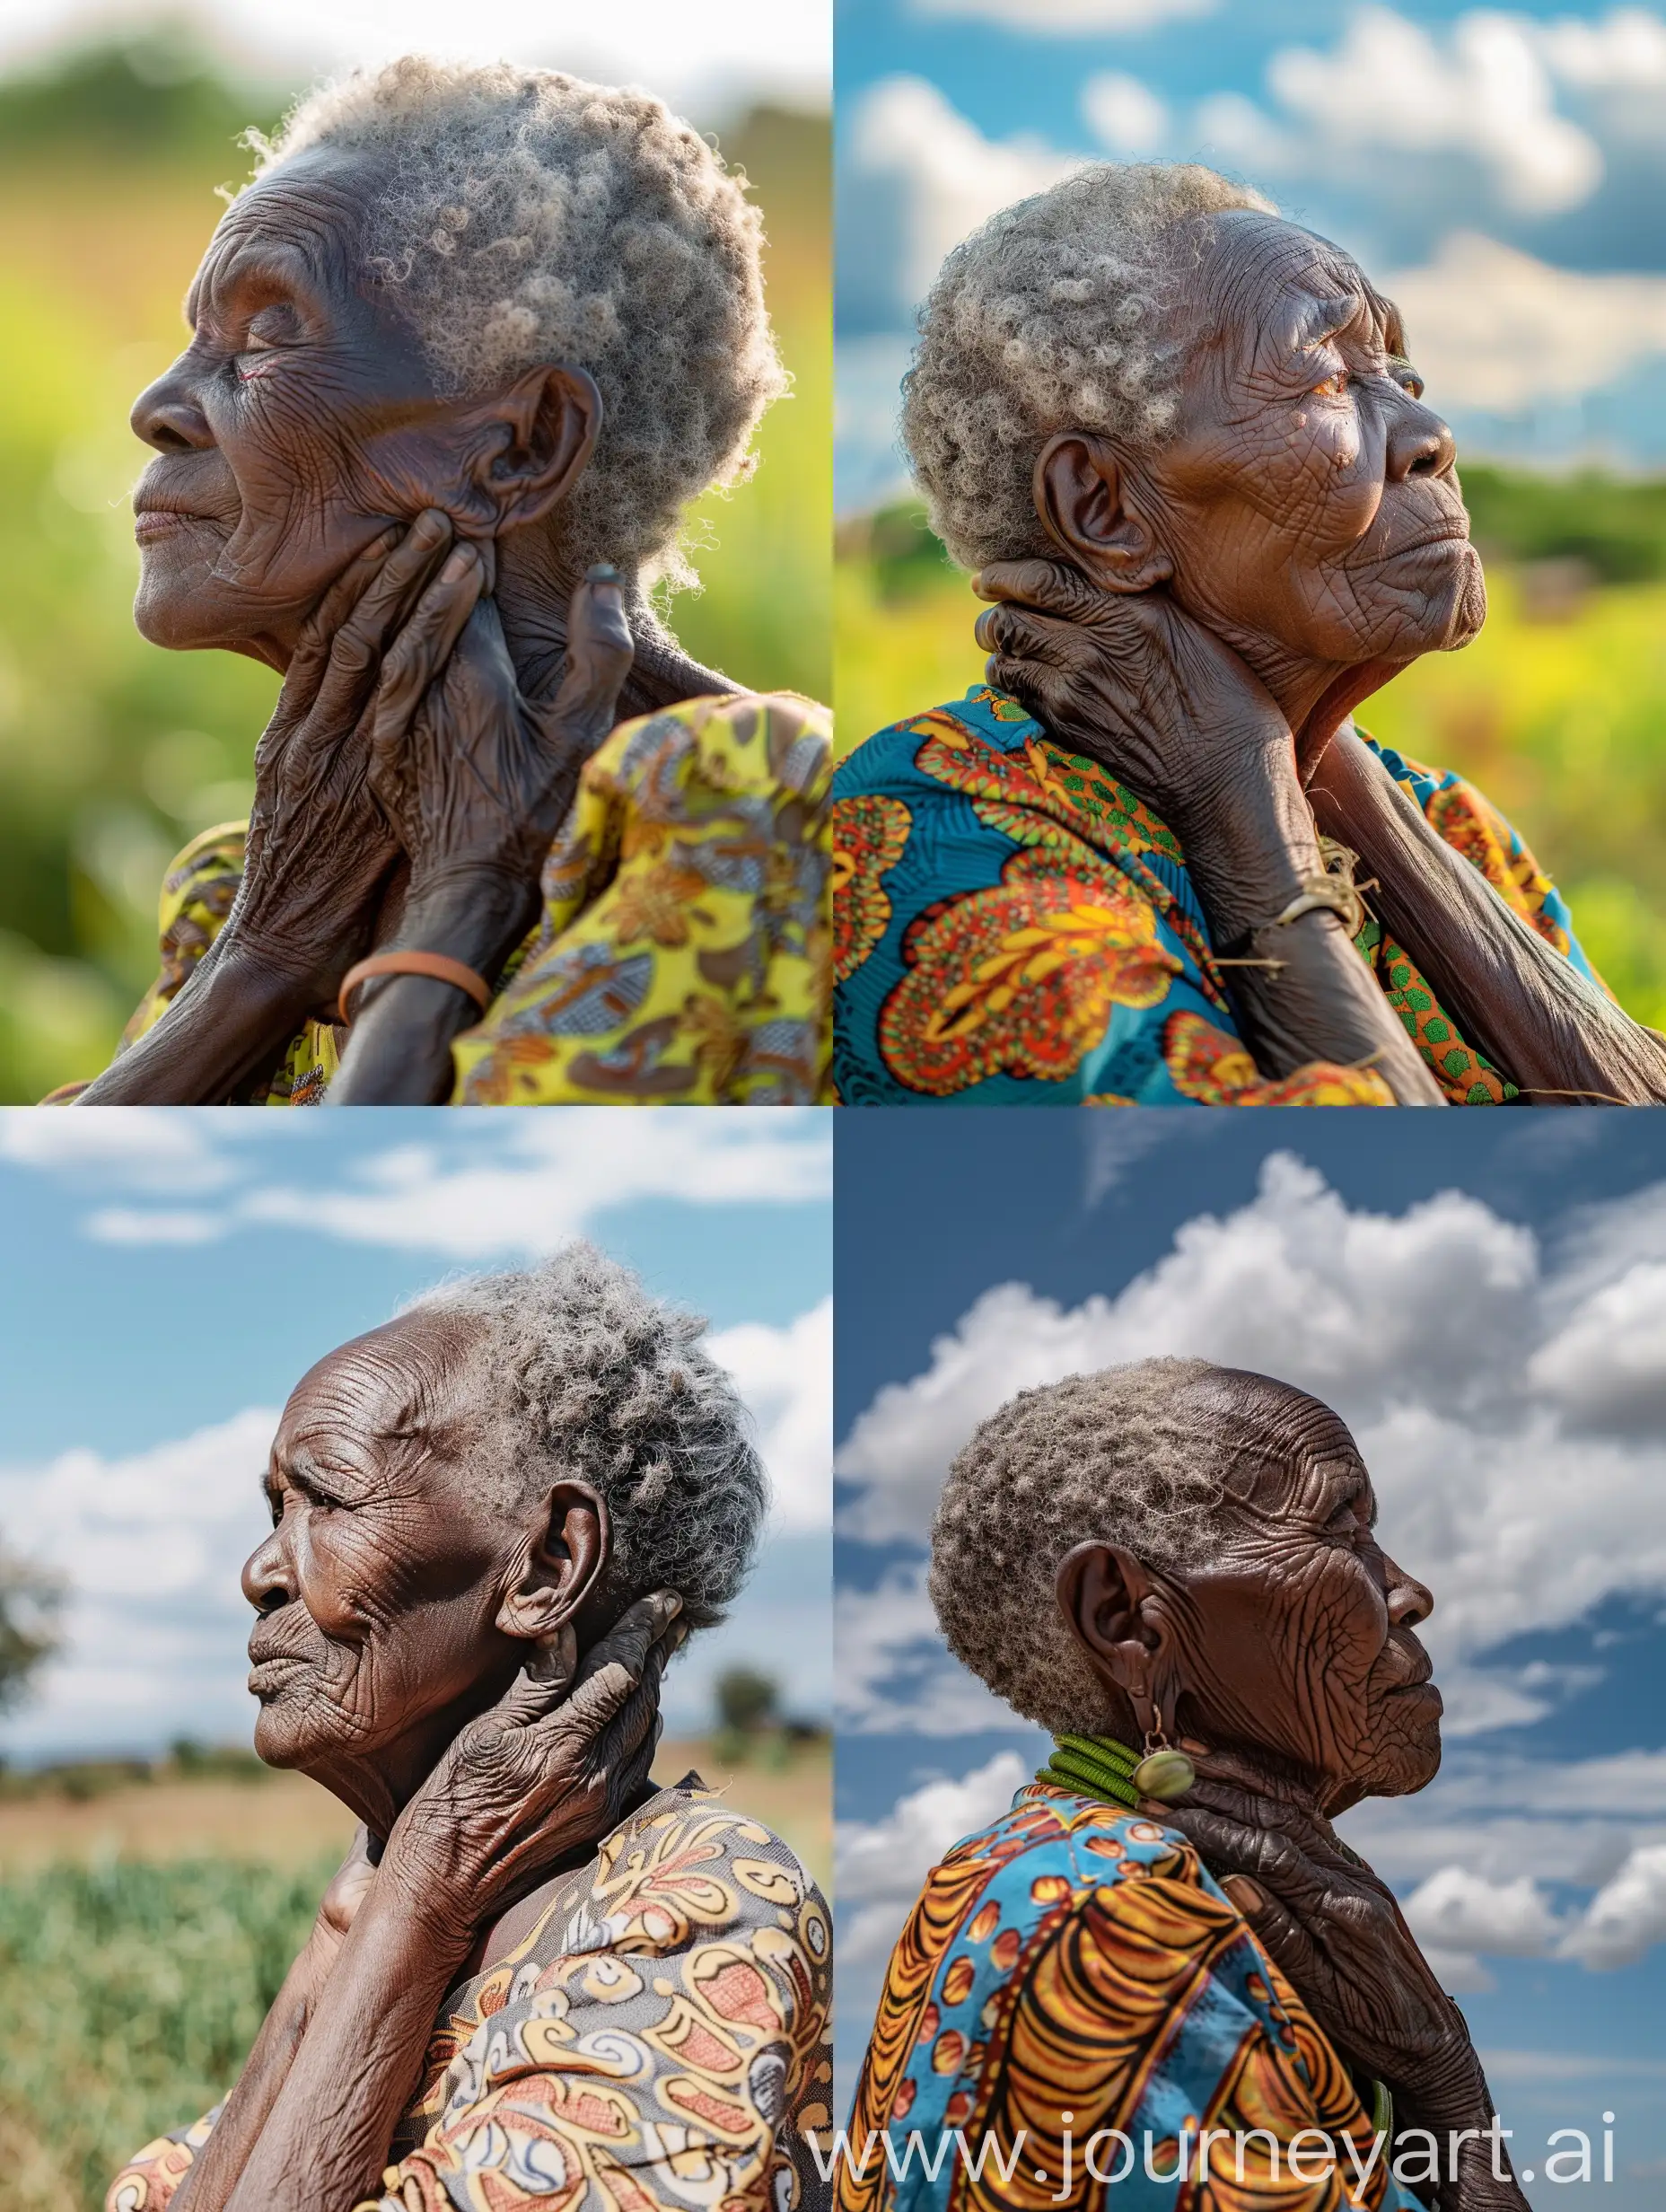 Elderly-African-Woman-Embracing-the-Sunlit-Day